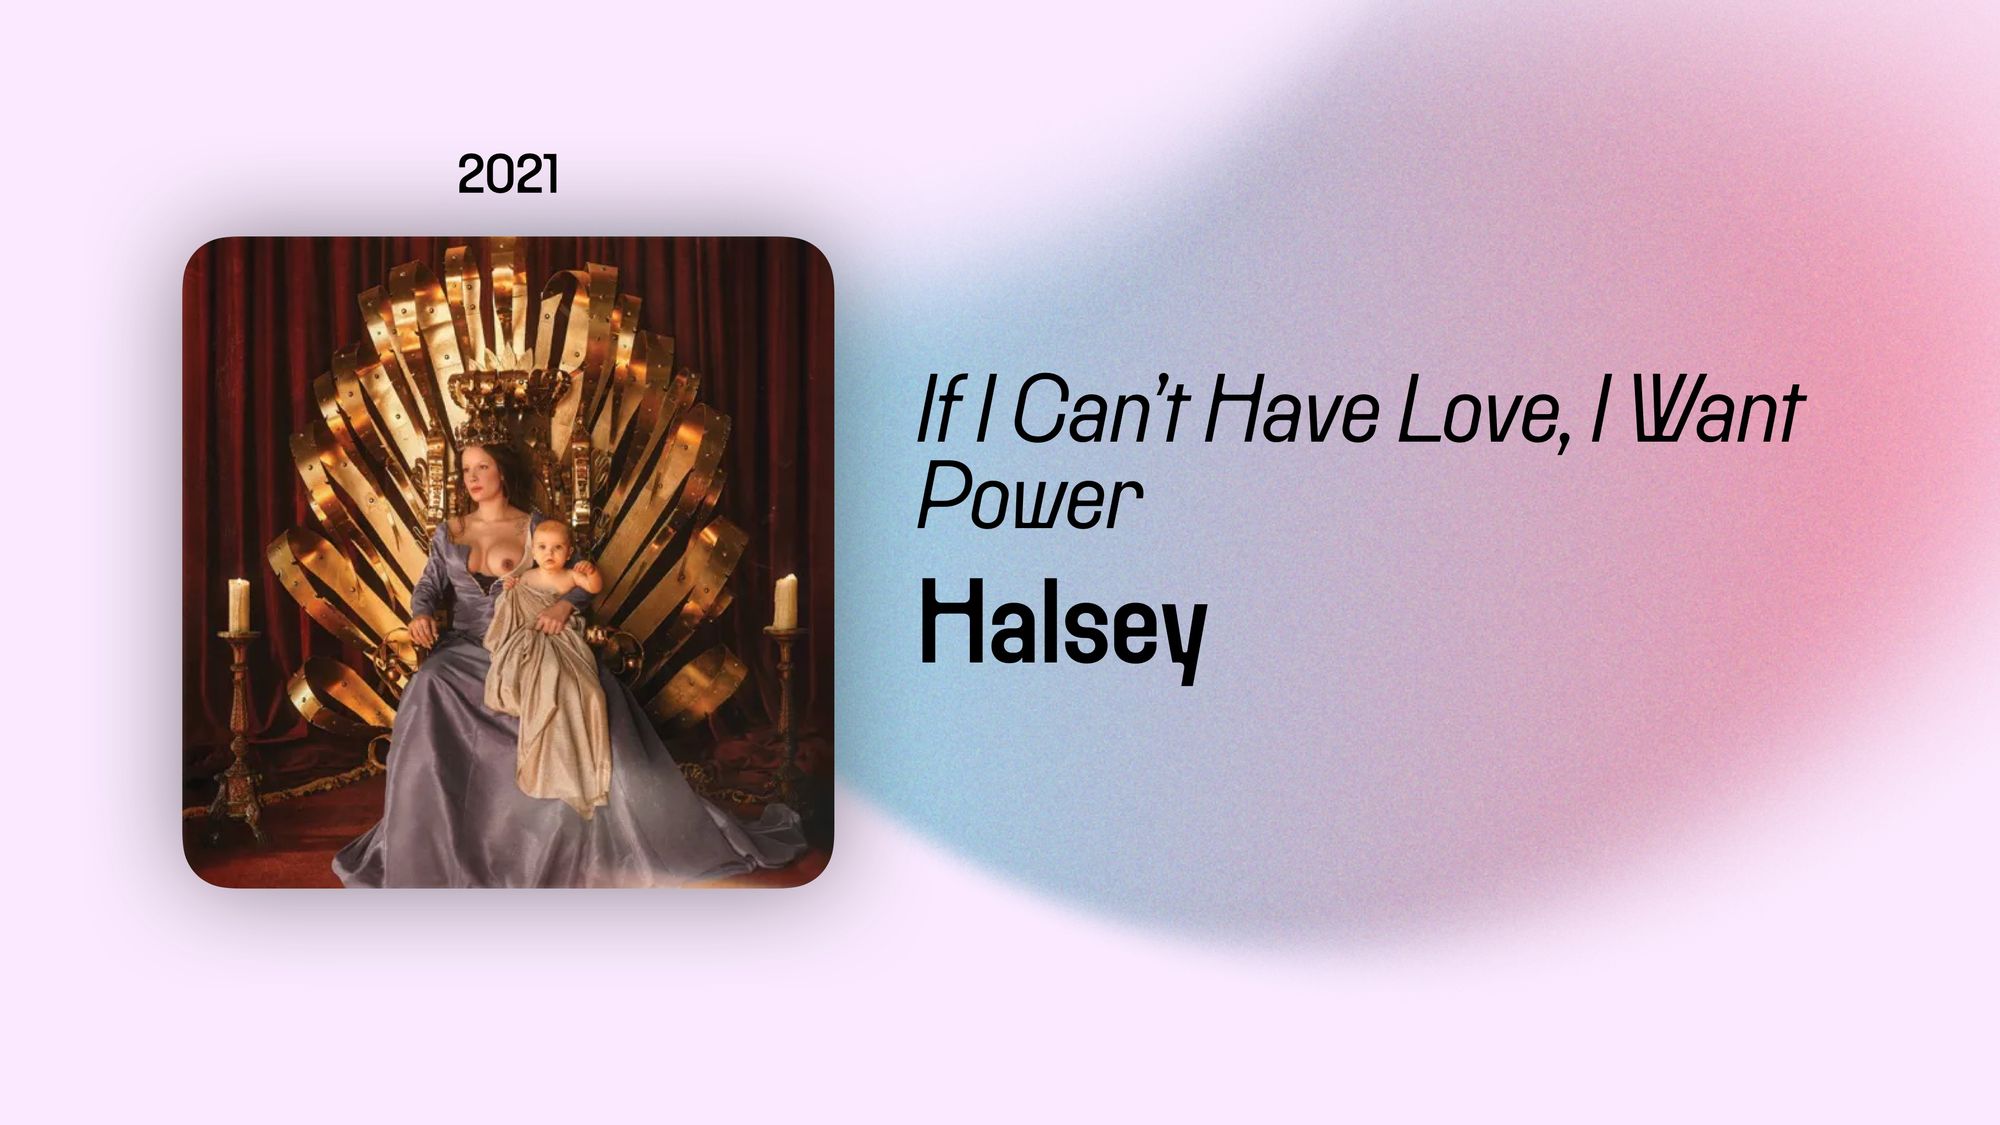 If I Can’t Have Love, I Want Power (365 Albums)